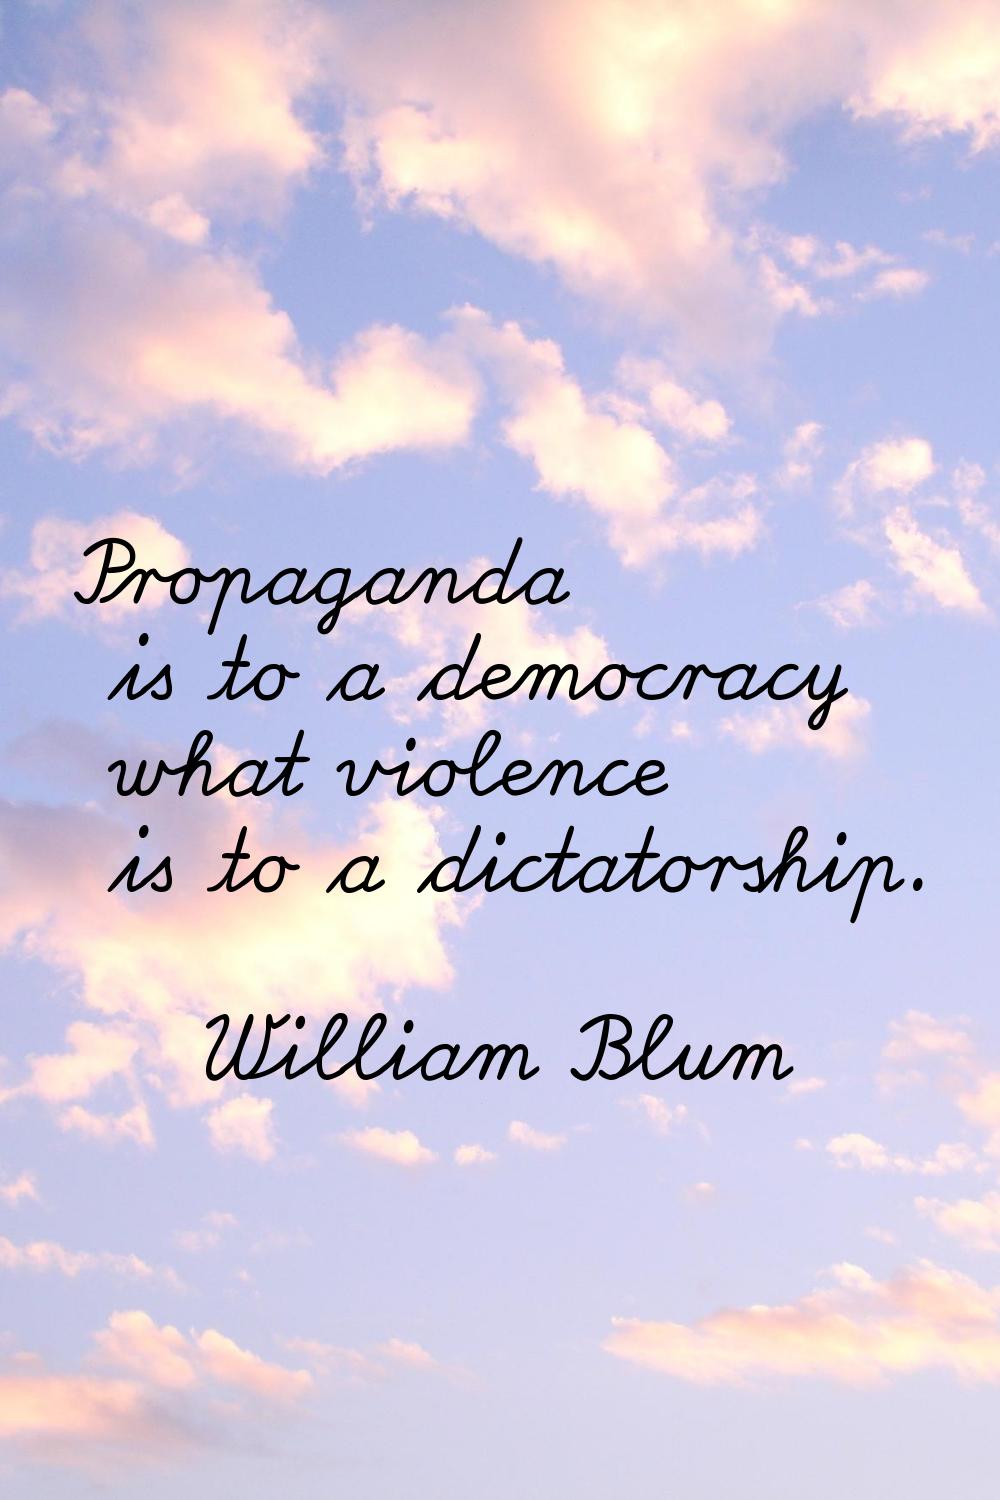 Propaganda is to a democracy what violence is to a dictatorship.